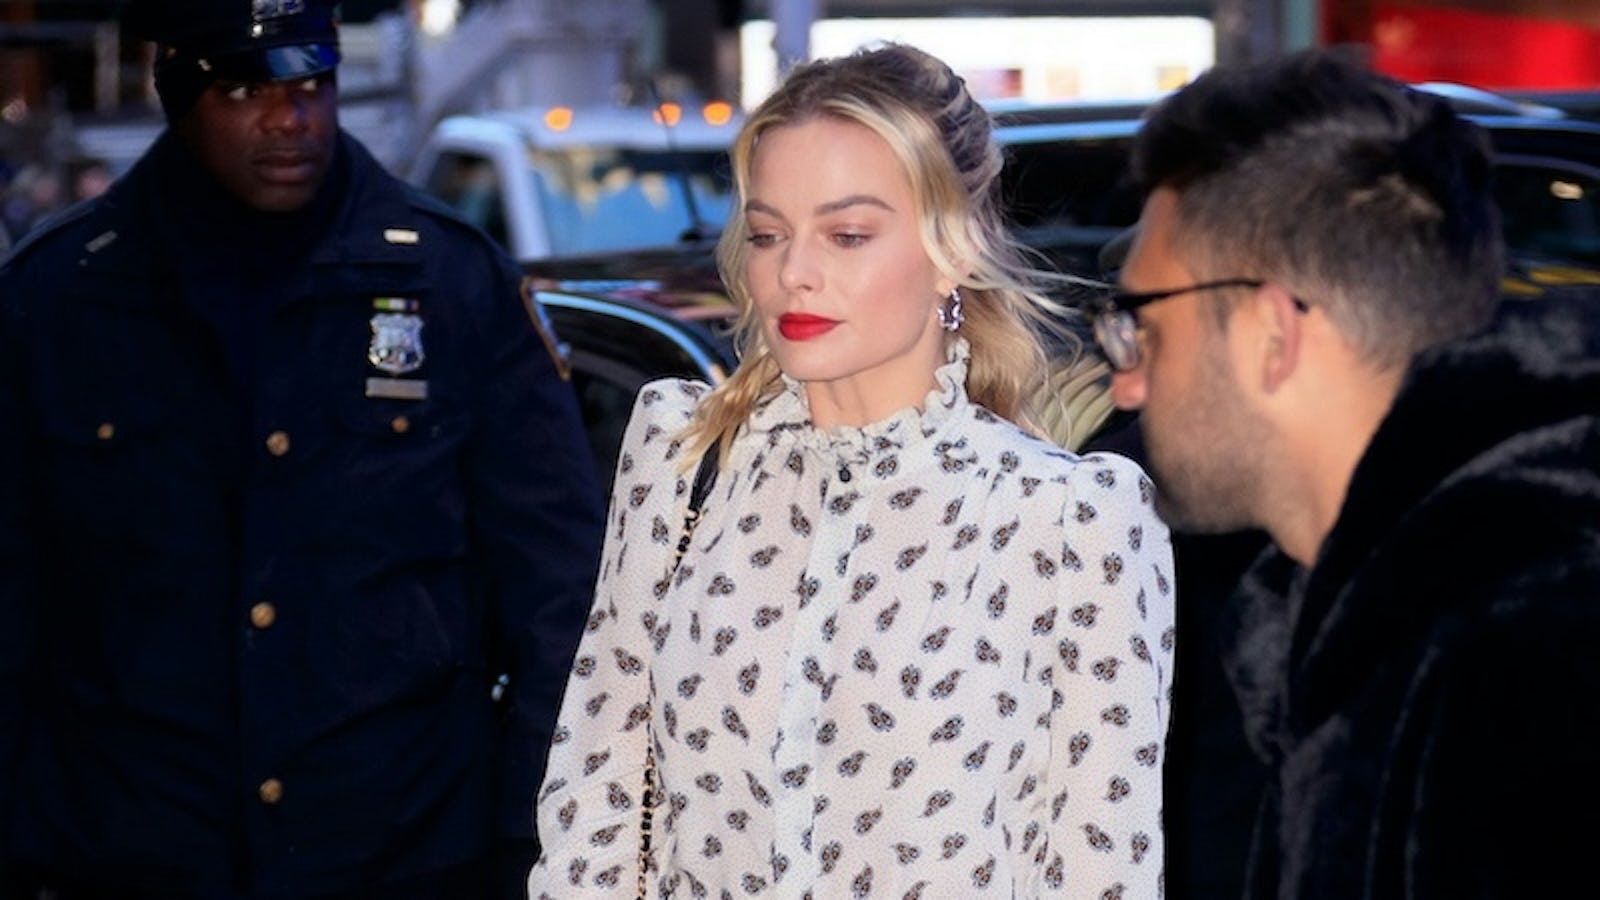 NEW YORK, NY - DECEMBER 04:  Margot Robbie at GMA on December 4, 2018 in New York City.  (Photo by Jackson Lee/GC Images)